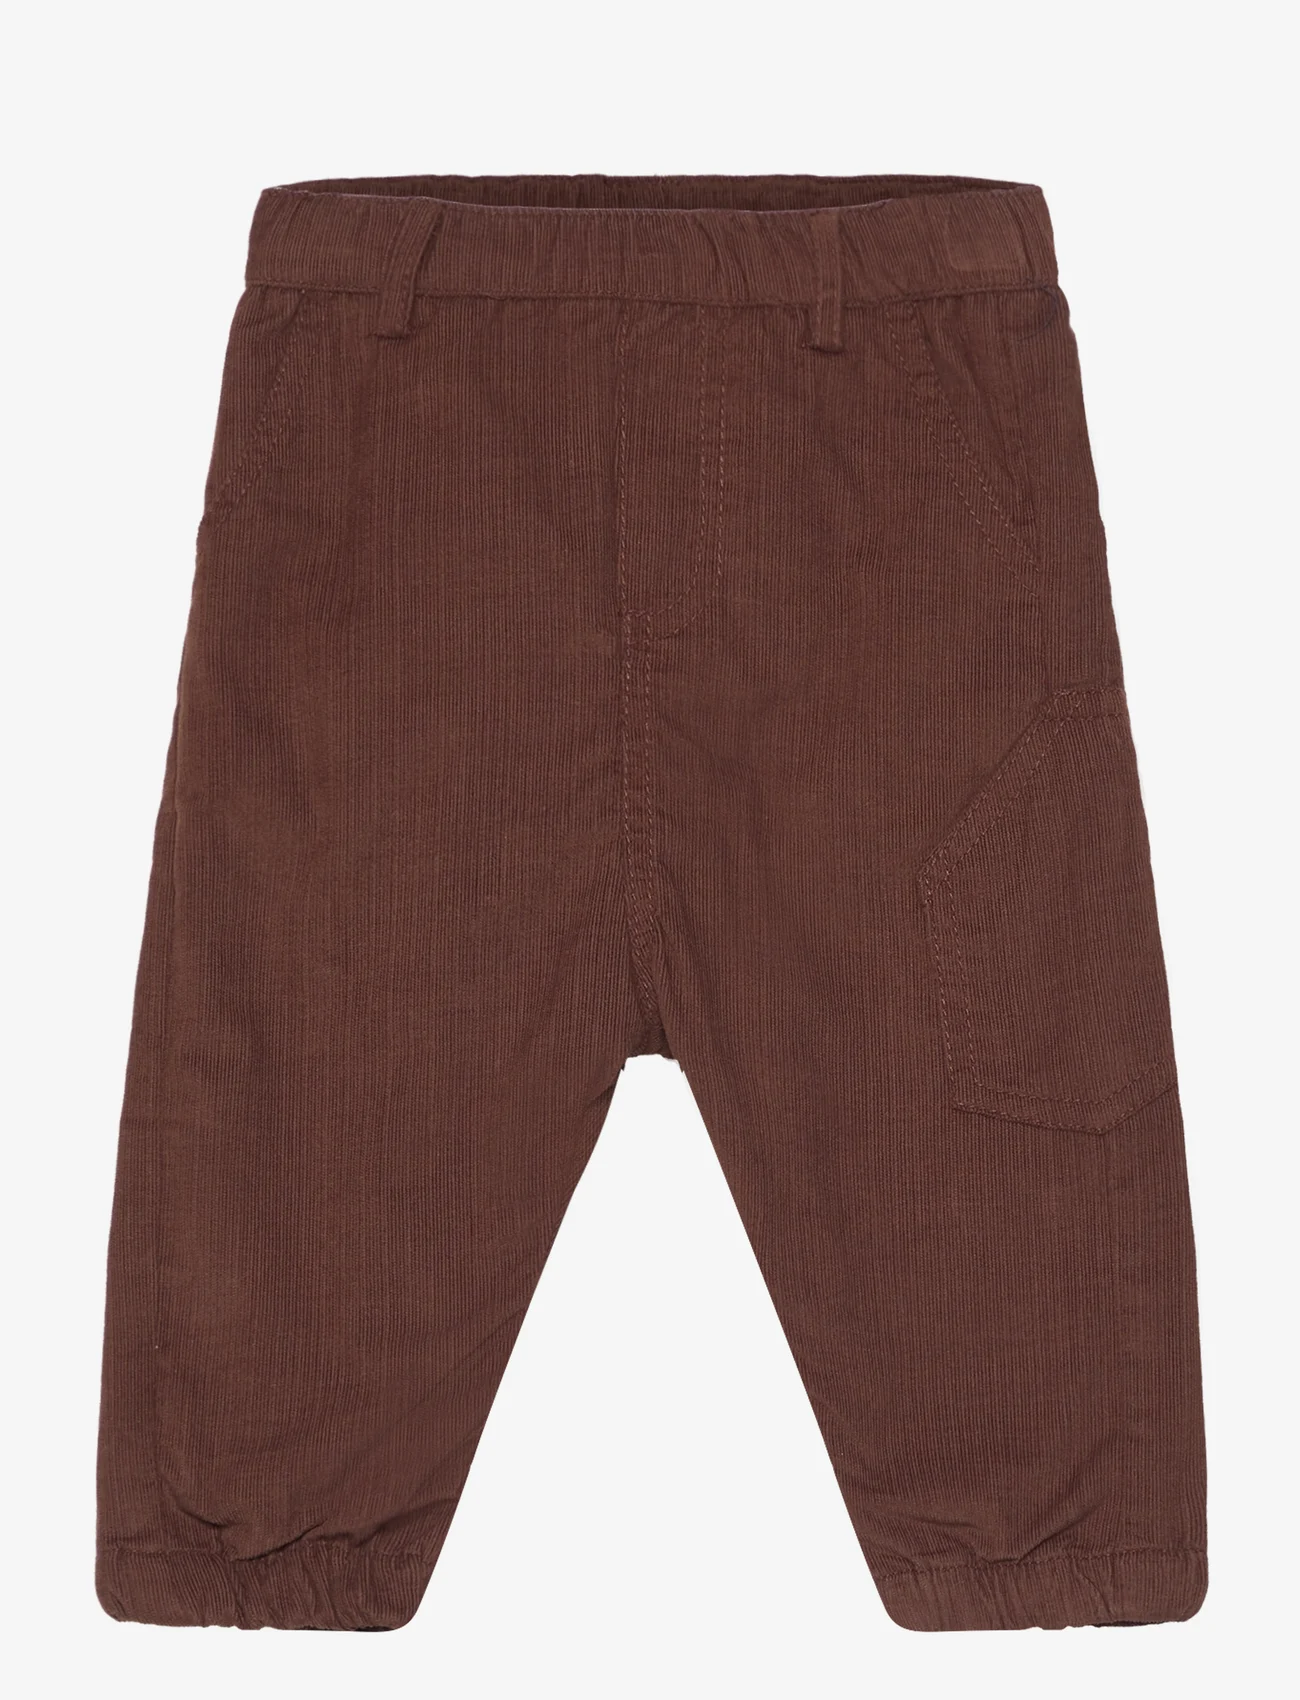 Hust & Claire - Tue - Trousers - lowest prices - chestnut - 0